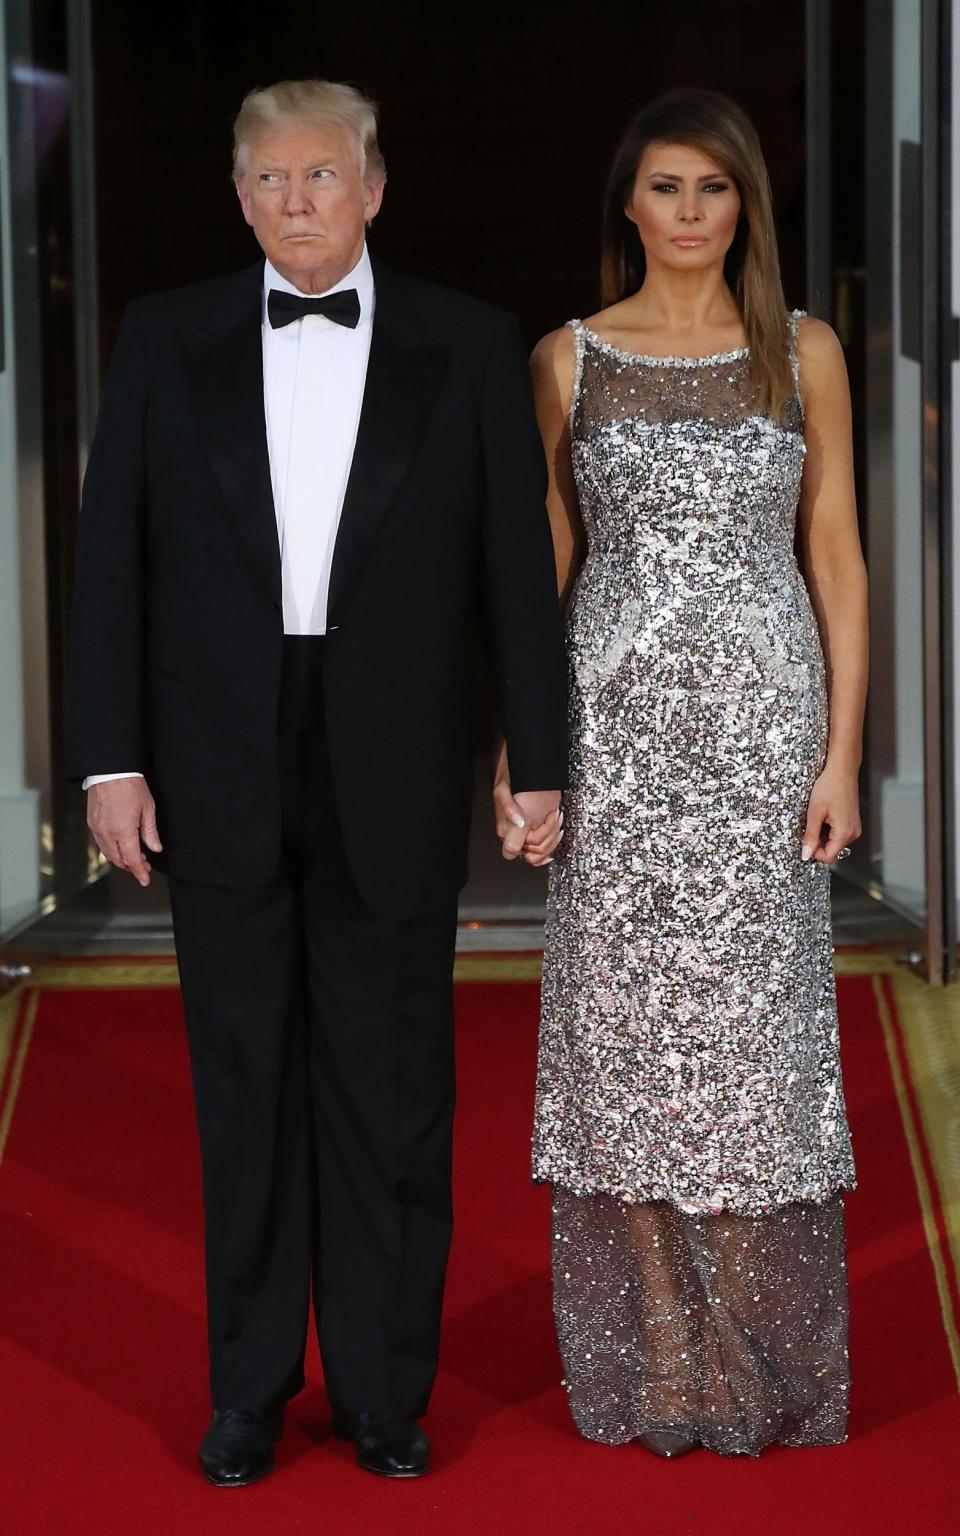 You can be chic sexy without causing a stir, like Melania Trump wearing silver sequins with sheer panels in 2018